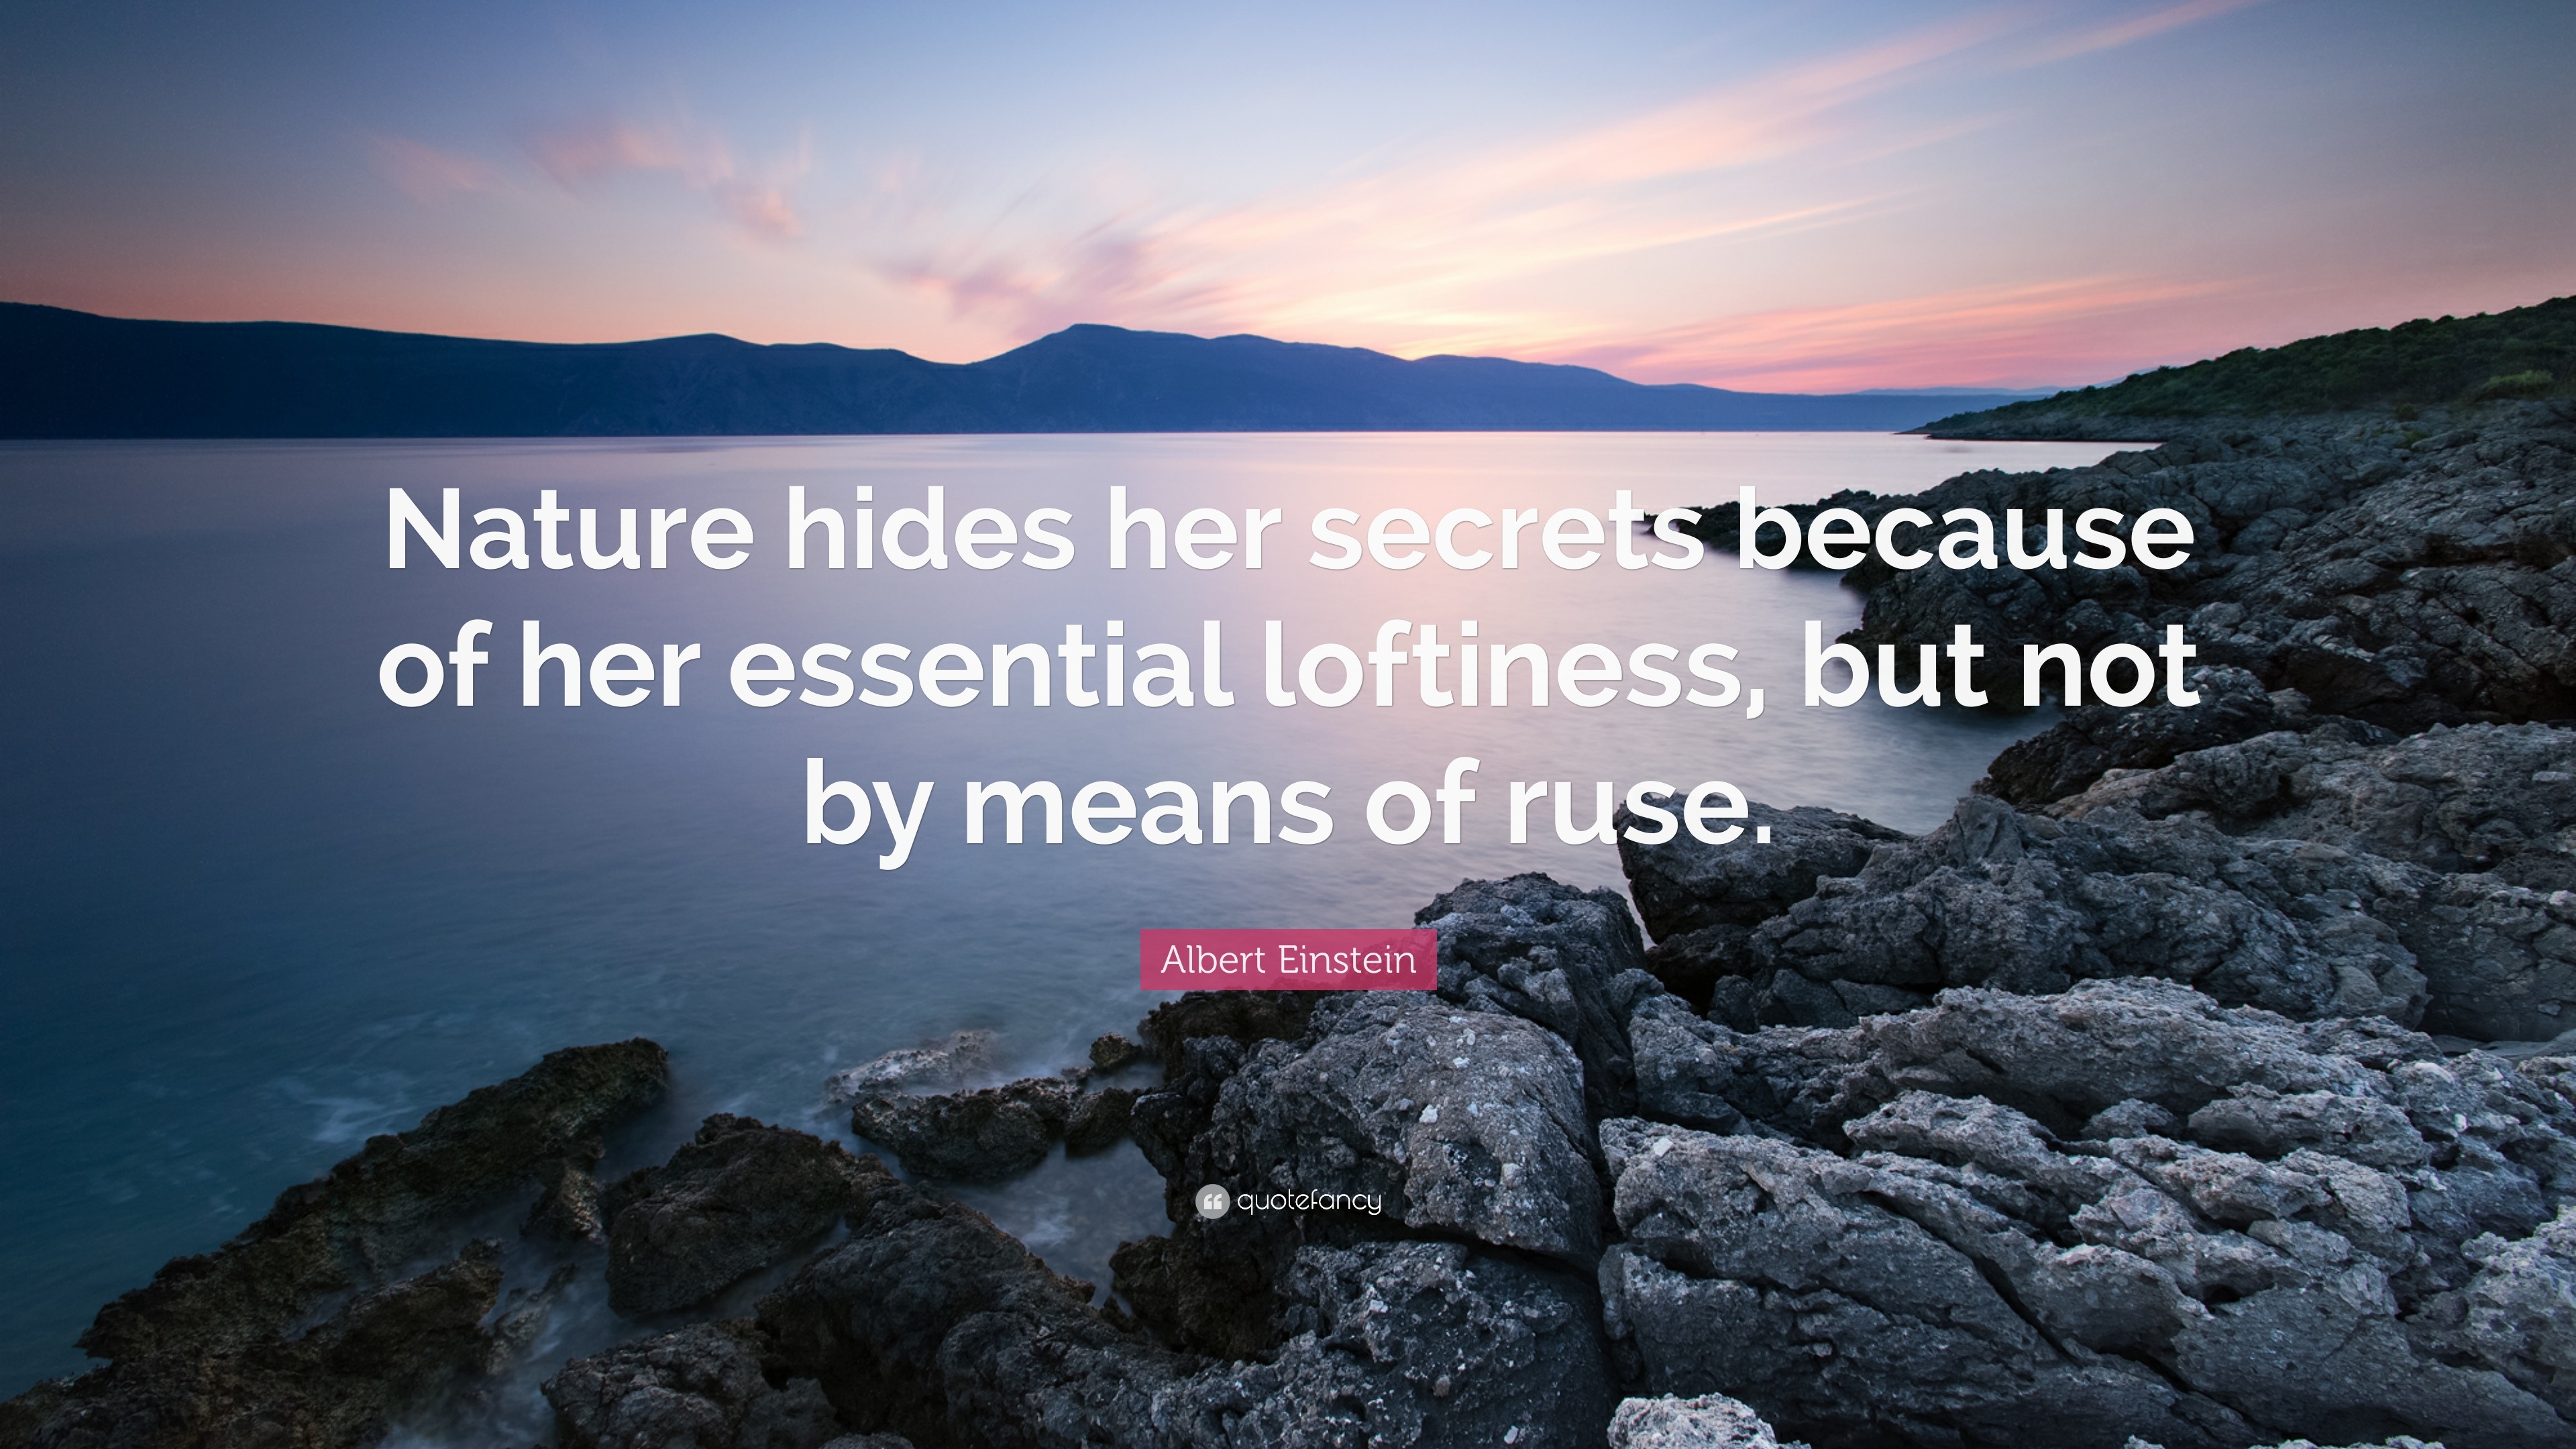 Albert Einstein Quote: “Nature hides her secrets because of her essential but not by